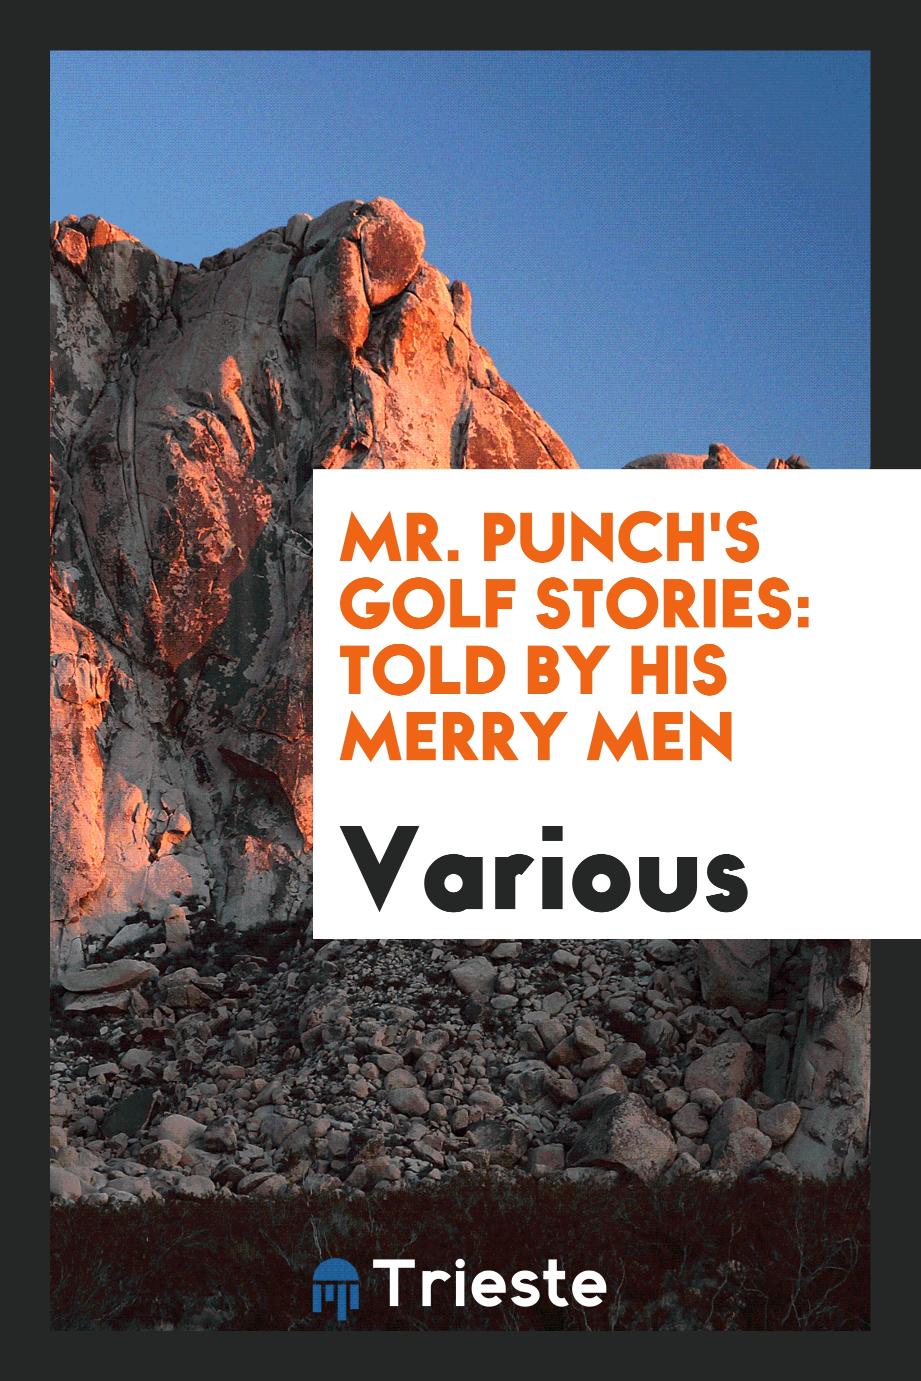 Mr. Punch's golf stories: told by his merry men